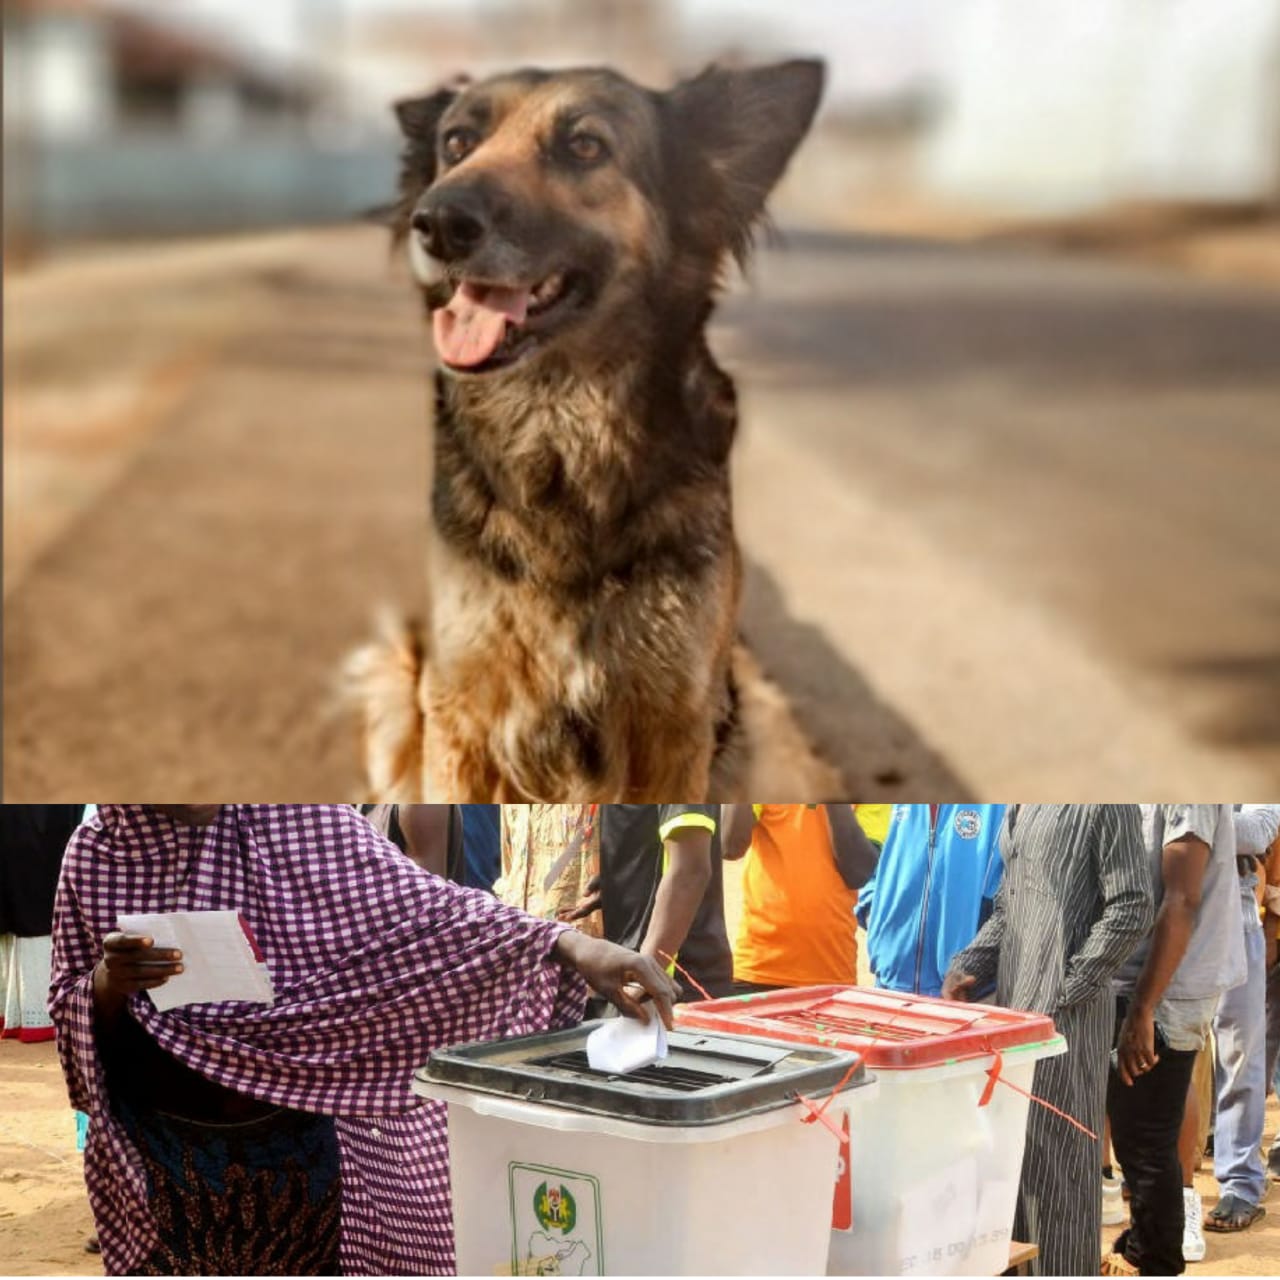 2023 General Elections: Use of Dogs And Other Pets at Polling Units Is Criminal And Condemnable - Police